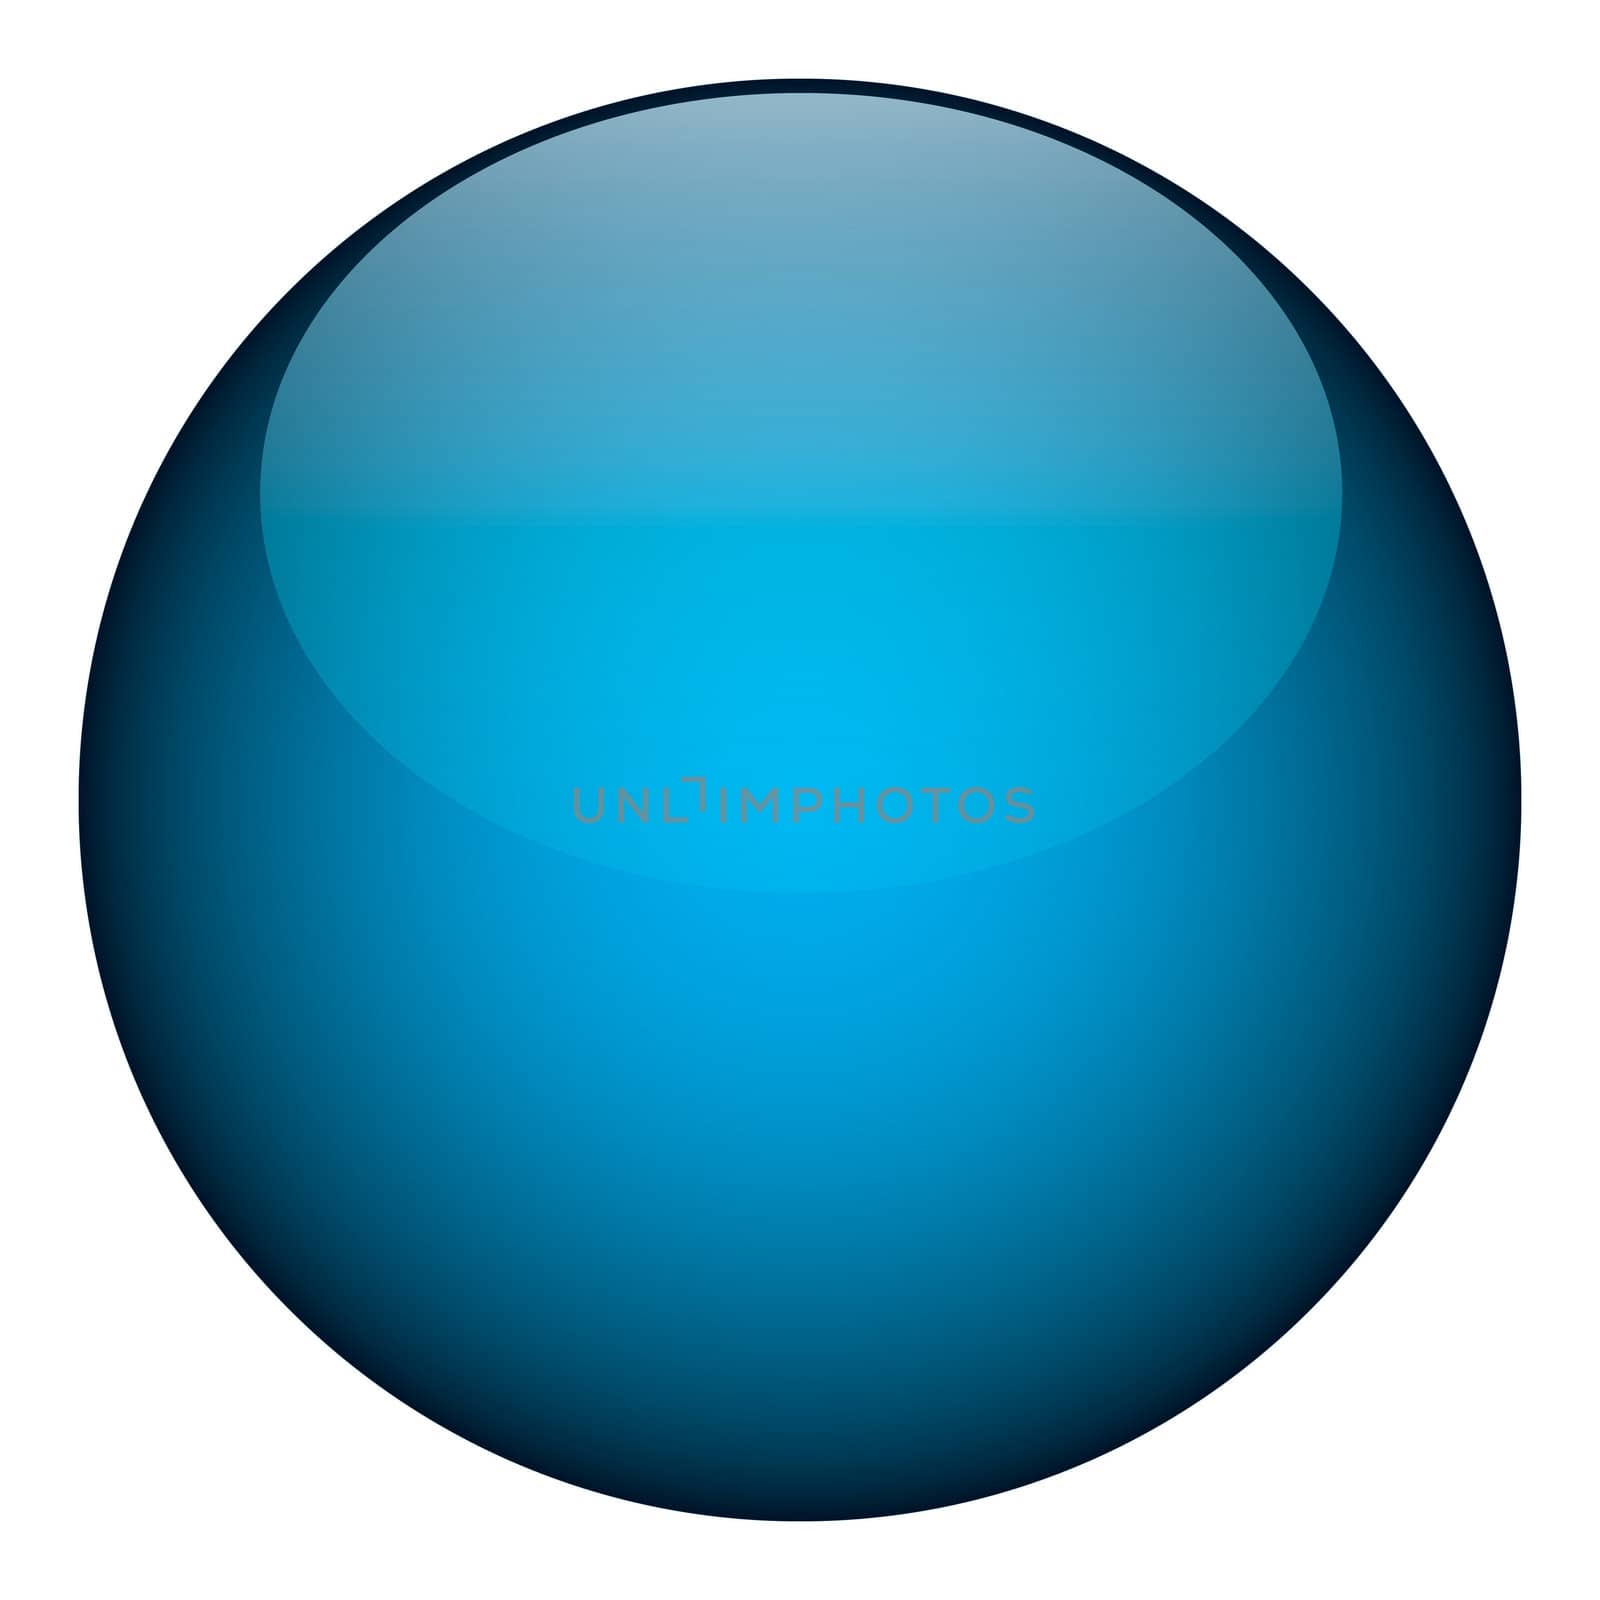 A blue orb - it works as a great planet, button, or other art element.